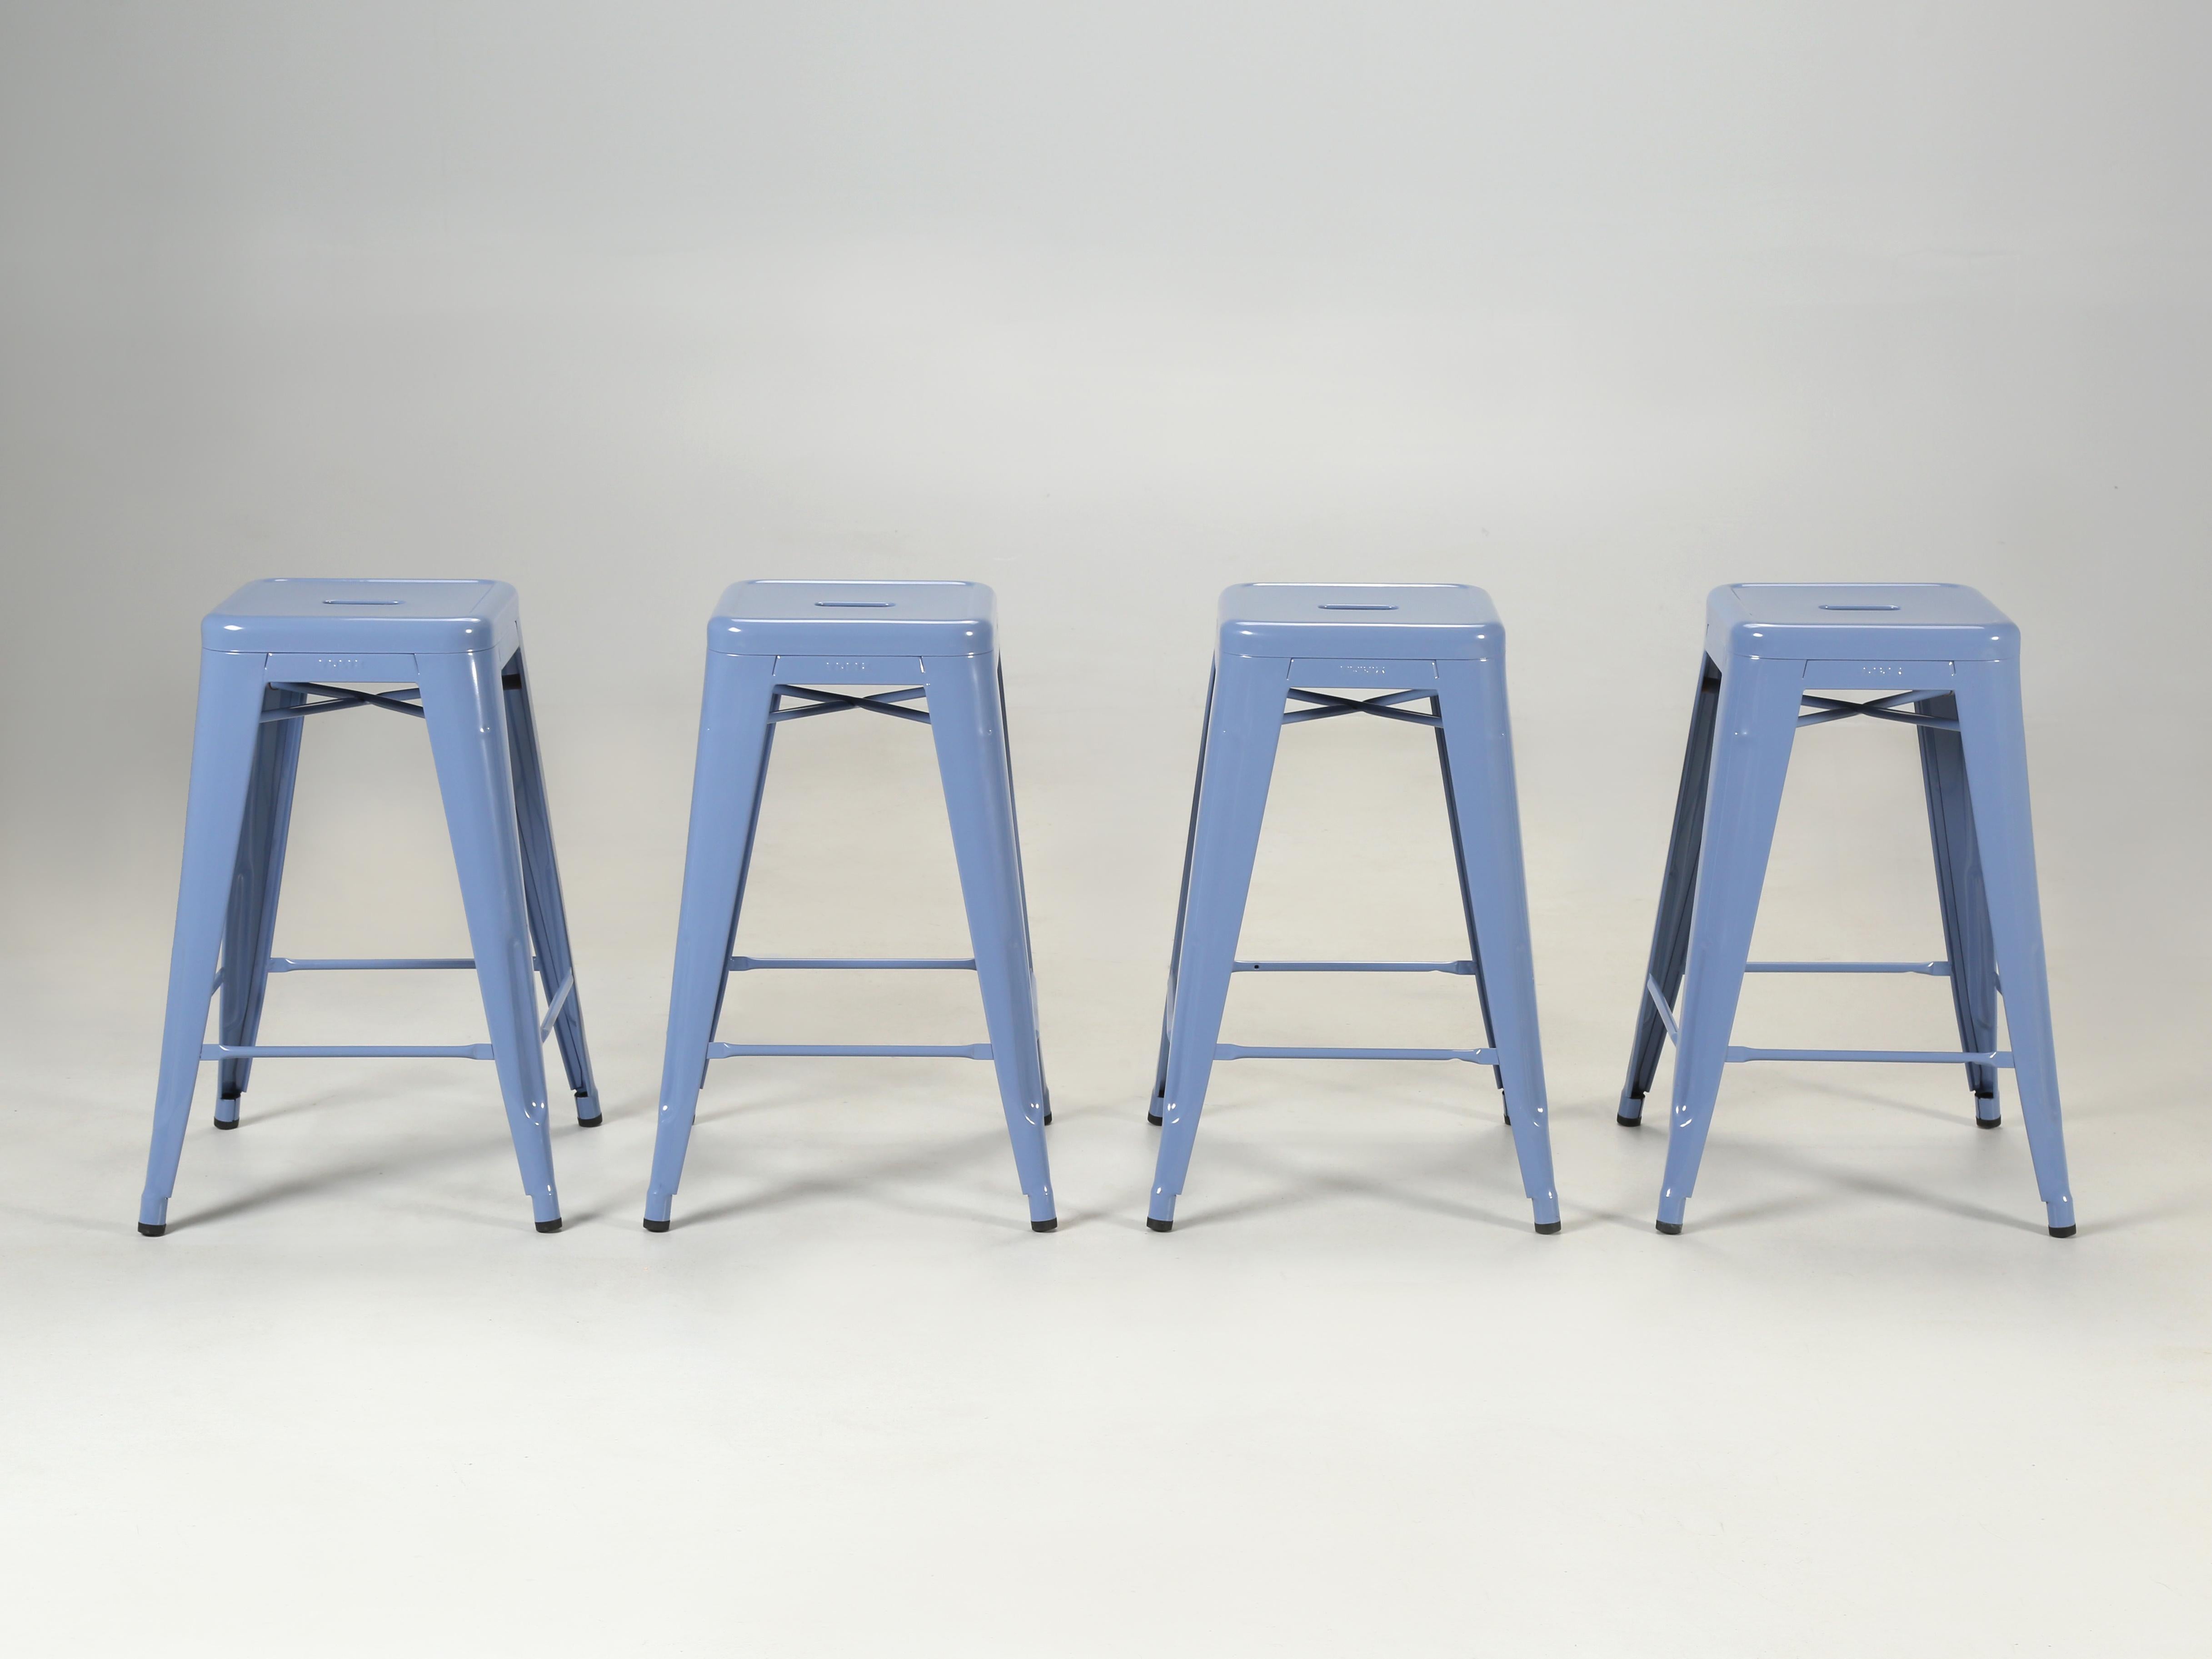 Tolix steel stacking stools and stacking chairs were designed by Xavier Pauchard, who was a trained roofer in France. By 1907 Xavier, later known as Mr. X had perfected a way of protecting sheet metal from rusting. In 1927 Mr. X had set up a factory